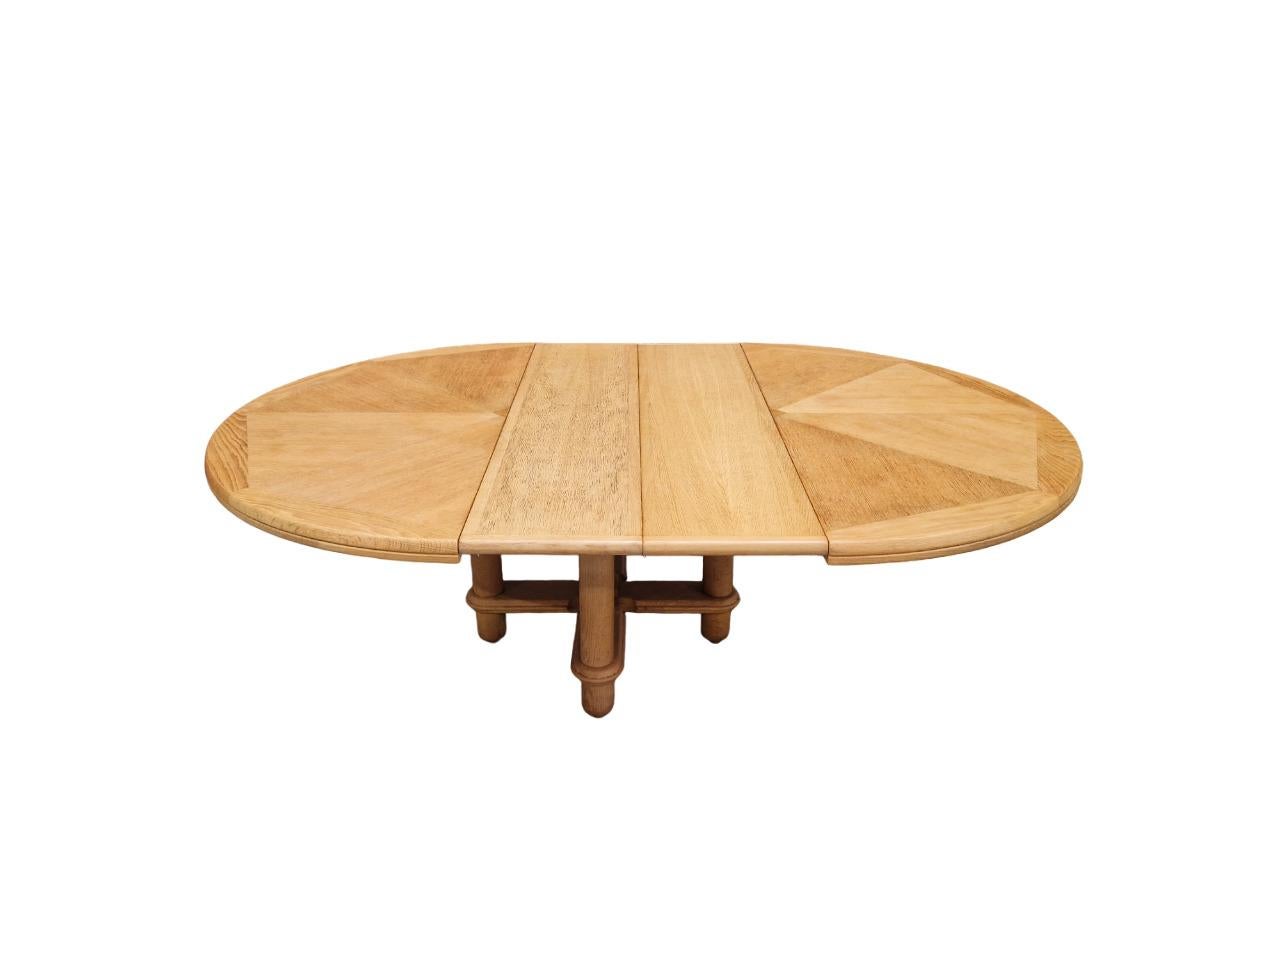 Guillerme and Chambron,  oak dinning room table Victorine, Edition Votre Maison 1970
Leaves  2x 35 cm